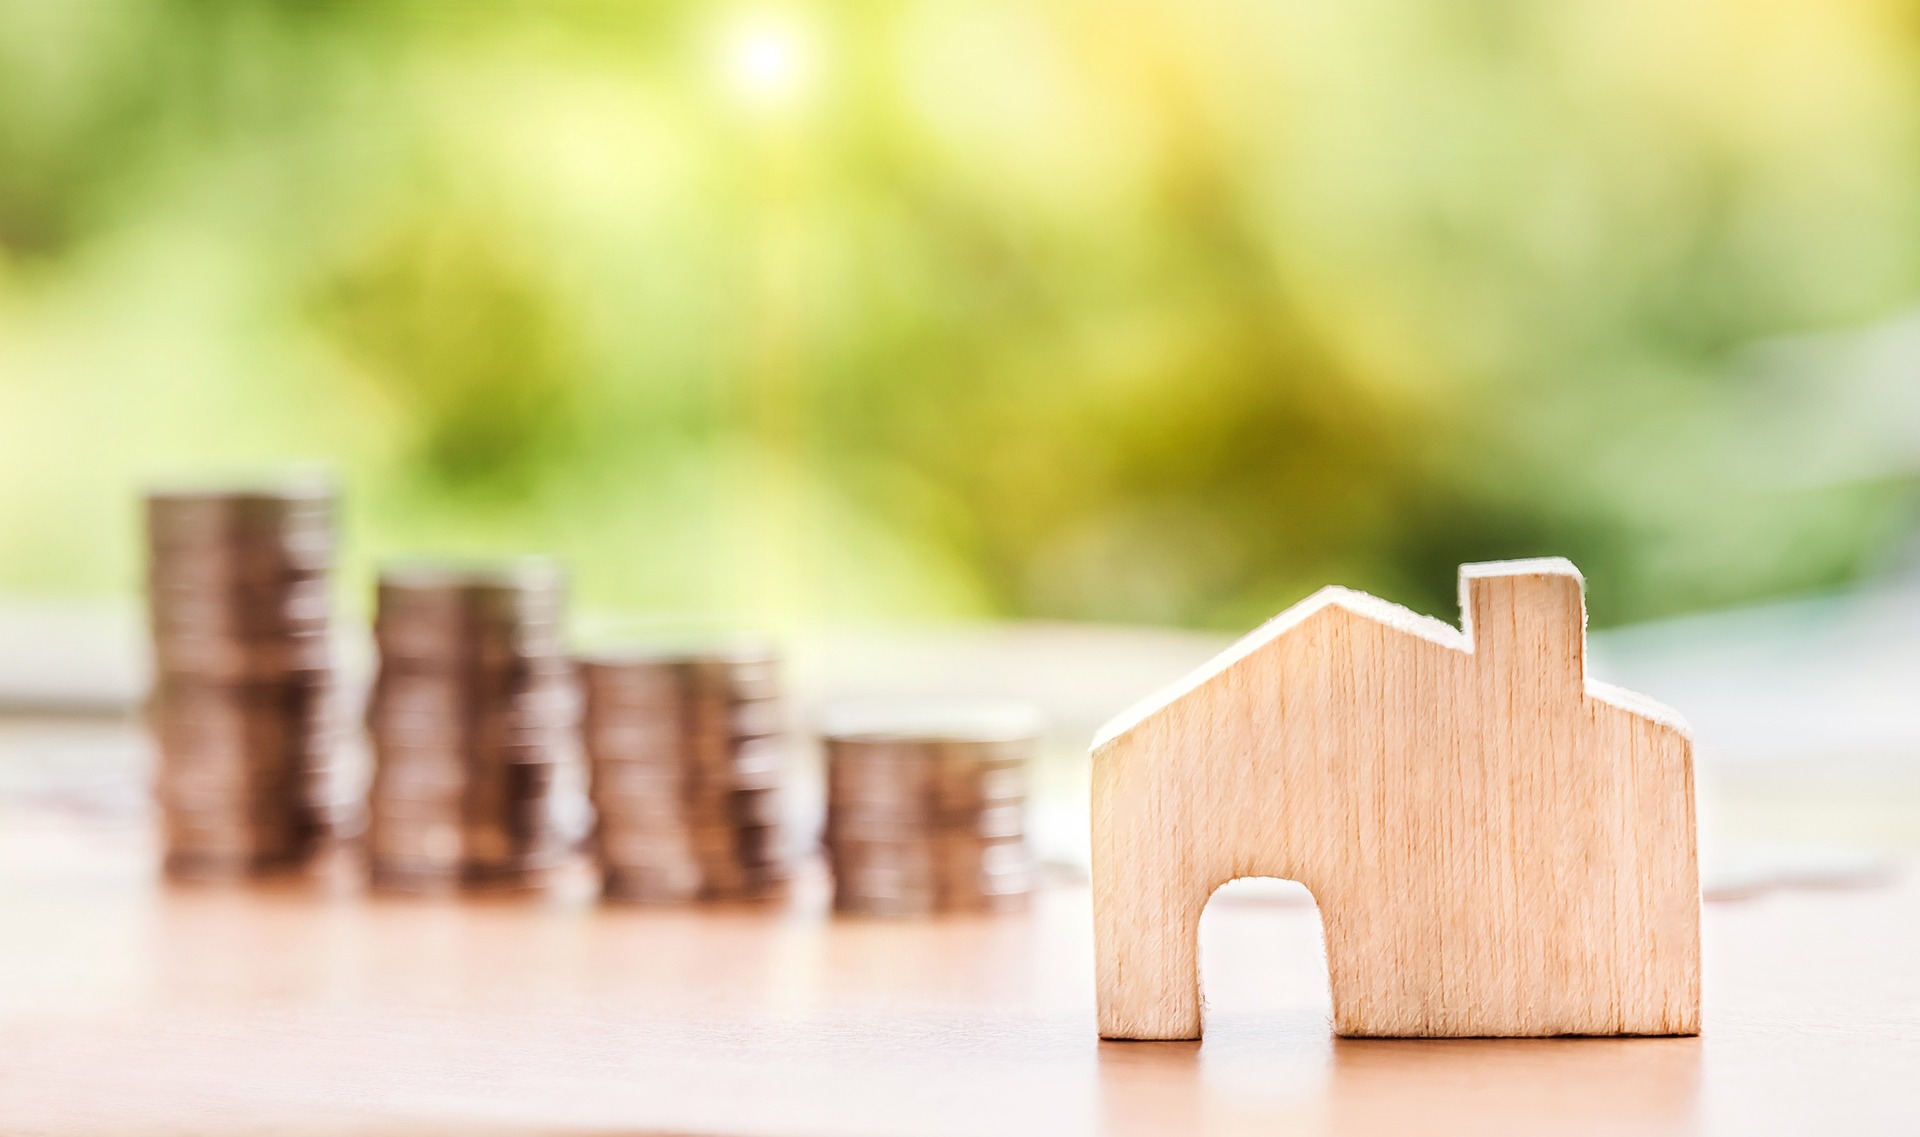 A wooden house, with money stacked in the background; our Conveyancing Solicitors in Lytham discuss Lifetime ISA closures, and how they could impact your property purchase.